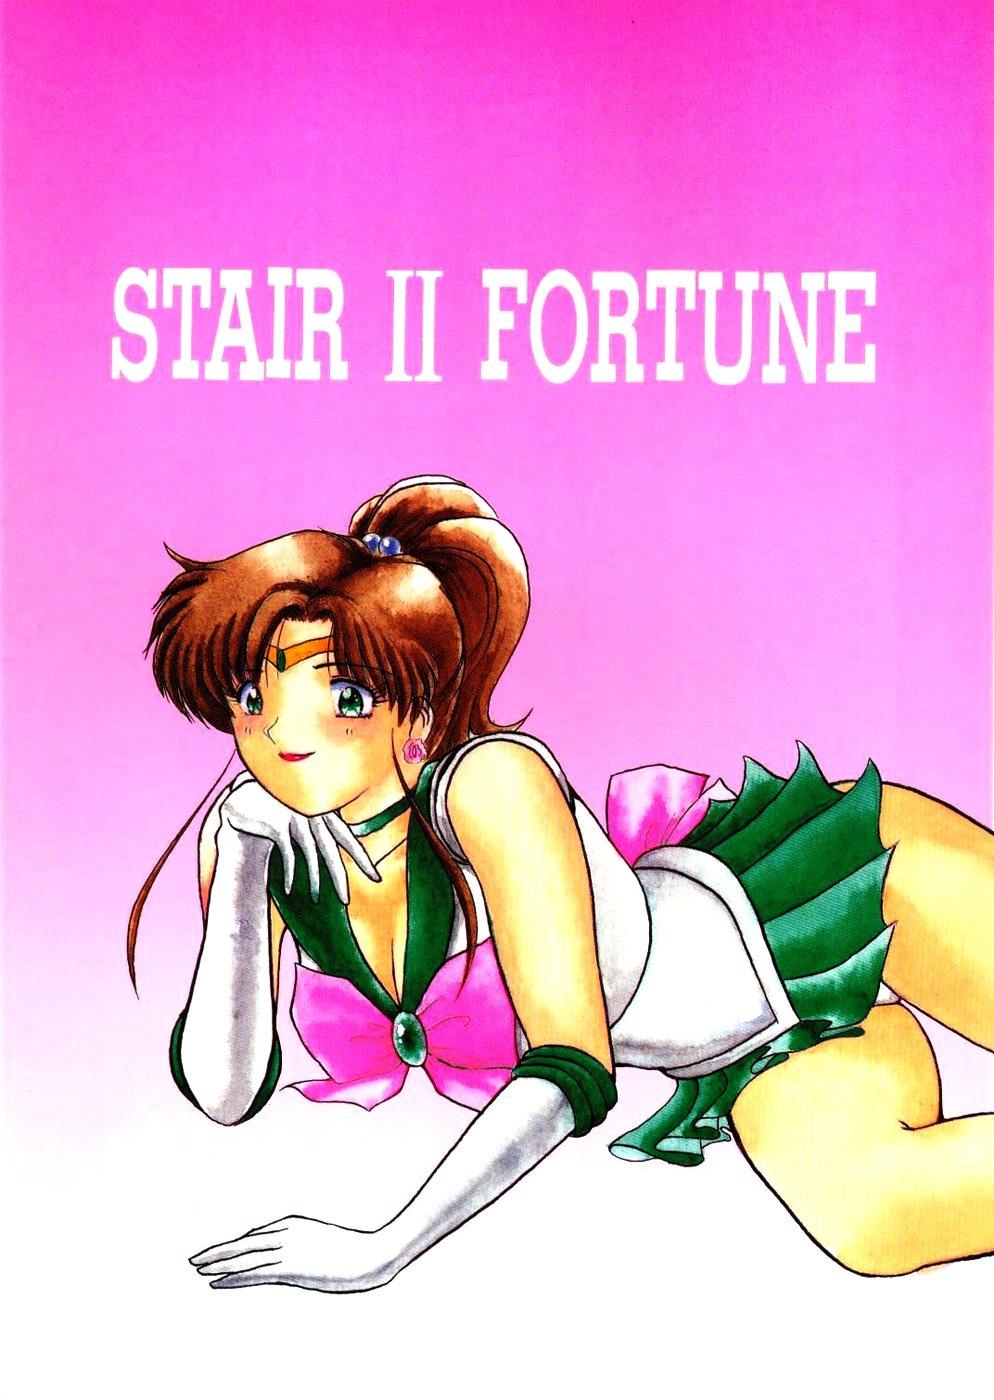 STAIR II FORTUNE 0